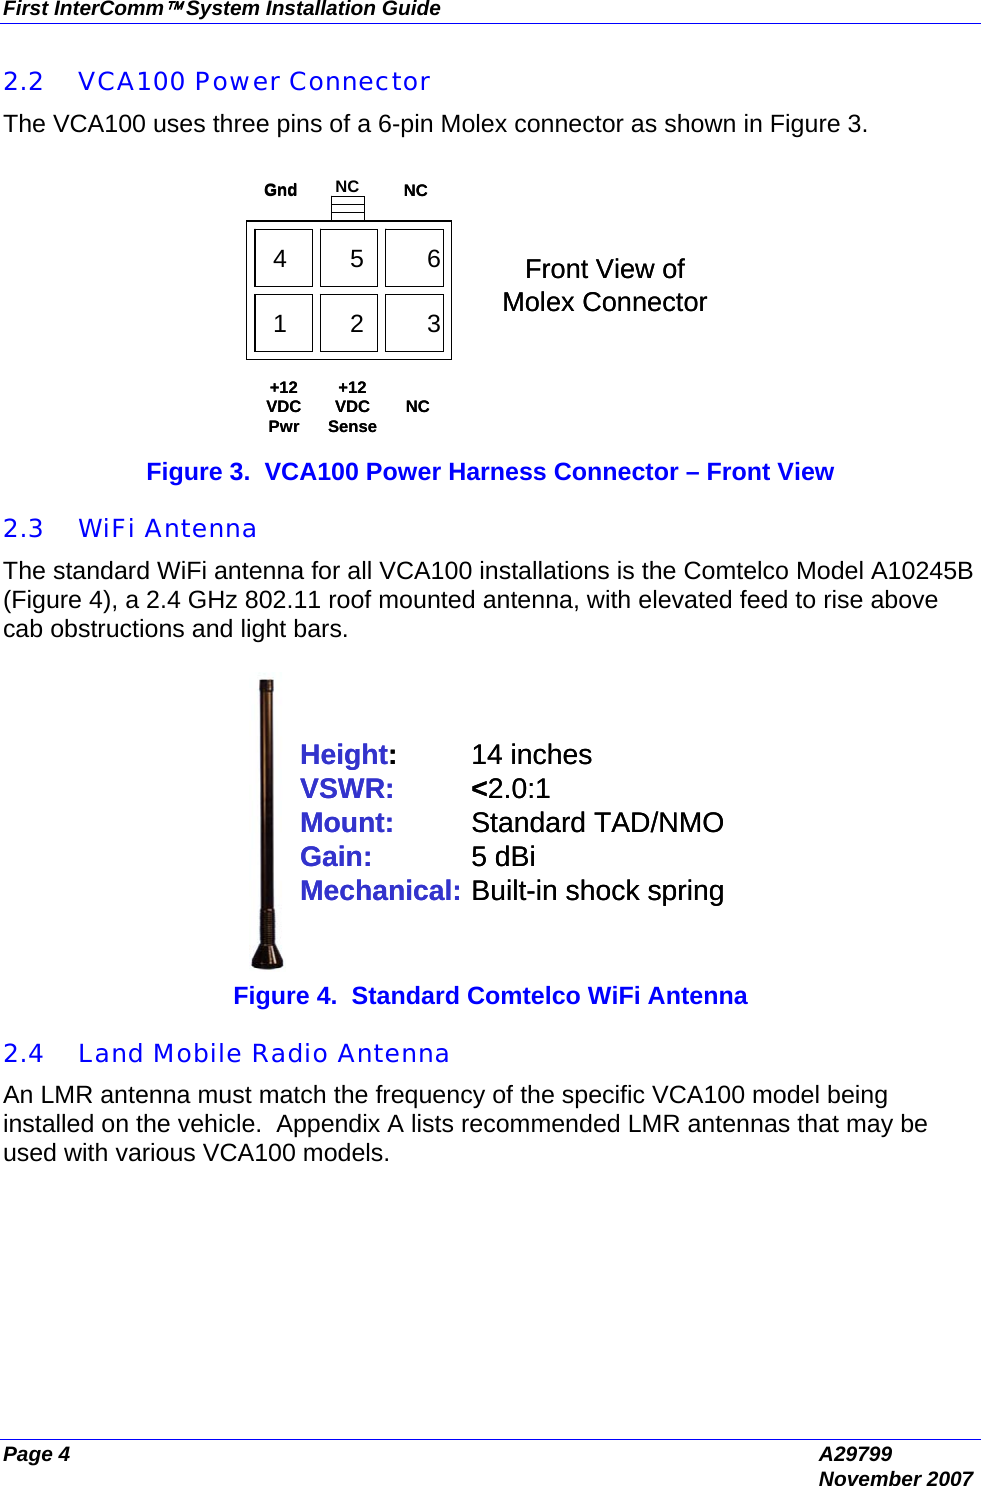 First InterComm™ System Installation Guide Page 4  A29799  November 2007 2.2 VCA100 Power Connector The VCA100 uses three pins of a 6-pin Molex connector as shown in Figure 3.   Figure 3.  VCA100 Power Harness Connector – Front View  2.3 WiFi Antenna The standard WiFi antenna for all VCA100 installations is the Comtelco Model A10245B (Figure 4), a 2.4 GHz 802.11 roof mounted antenna, with elevated feed to rise above cab obstructions and light bars.  Height:14 inchesVSWR: &lt;2.0:1Mount: Standard TAD/NMOGain: 5 dBiMechanical: Built-in shock springHeight:14 inchesVSWR: &lt;2.0:1Mount: Standard TAD/NMOGain: 5 dBiMechanical: Built-in shock spring Figure 4.  Standard Comtelco WiFi Antenna  2.4 Land Mobile Radio Antenna An LMR antenna must match the frequency of the specific VCA100 model being installed on the vehicle.  Appendix A lists recommended LMR antennas that may be used with various VCA100 models. 1         2         34         5         6NC+12 VDC SenseNC+12  VDC  Pwr NC Gnd Front View of Molex Connector1         2         34         5         61         2         34         5         61         2         34         5         6NC+12 VDC SenseNC+12  VDC  Pwr Gnd Front View of Molex Connector